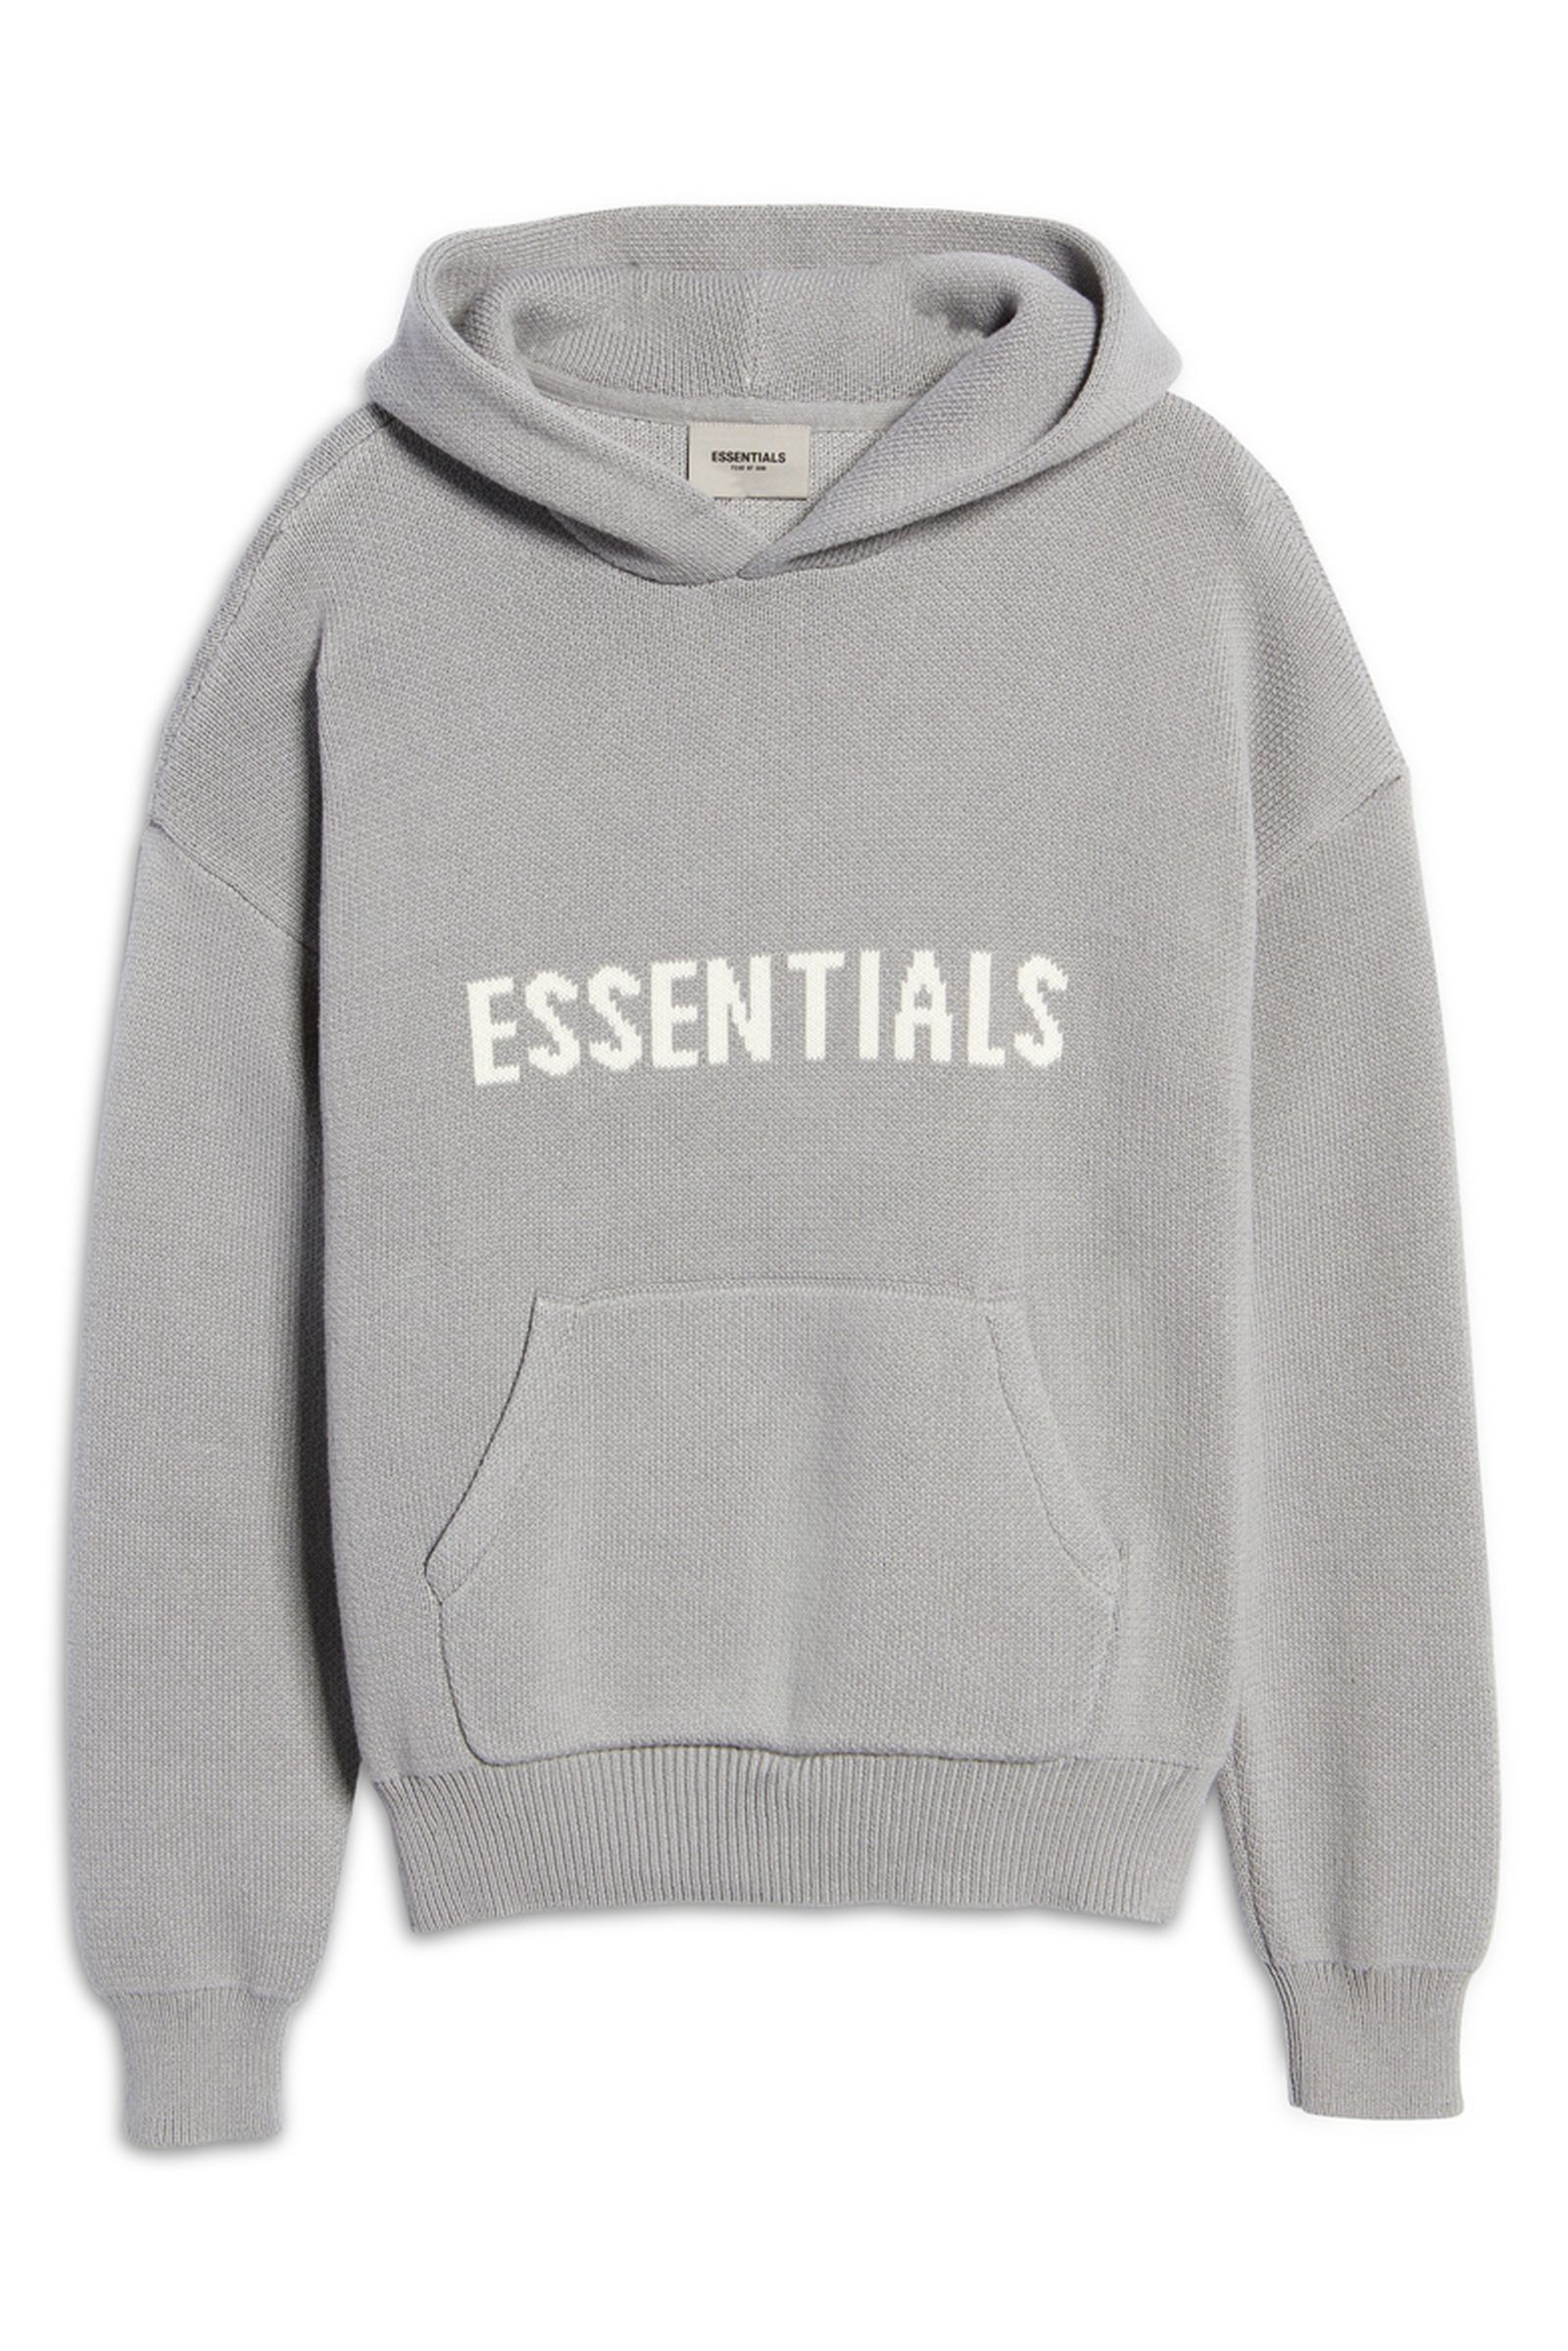 fear of god essentials nordstrom exclusive (4)